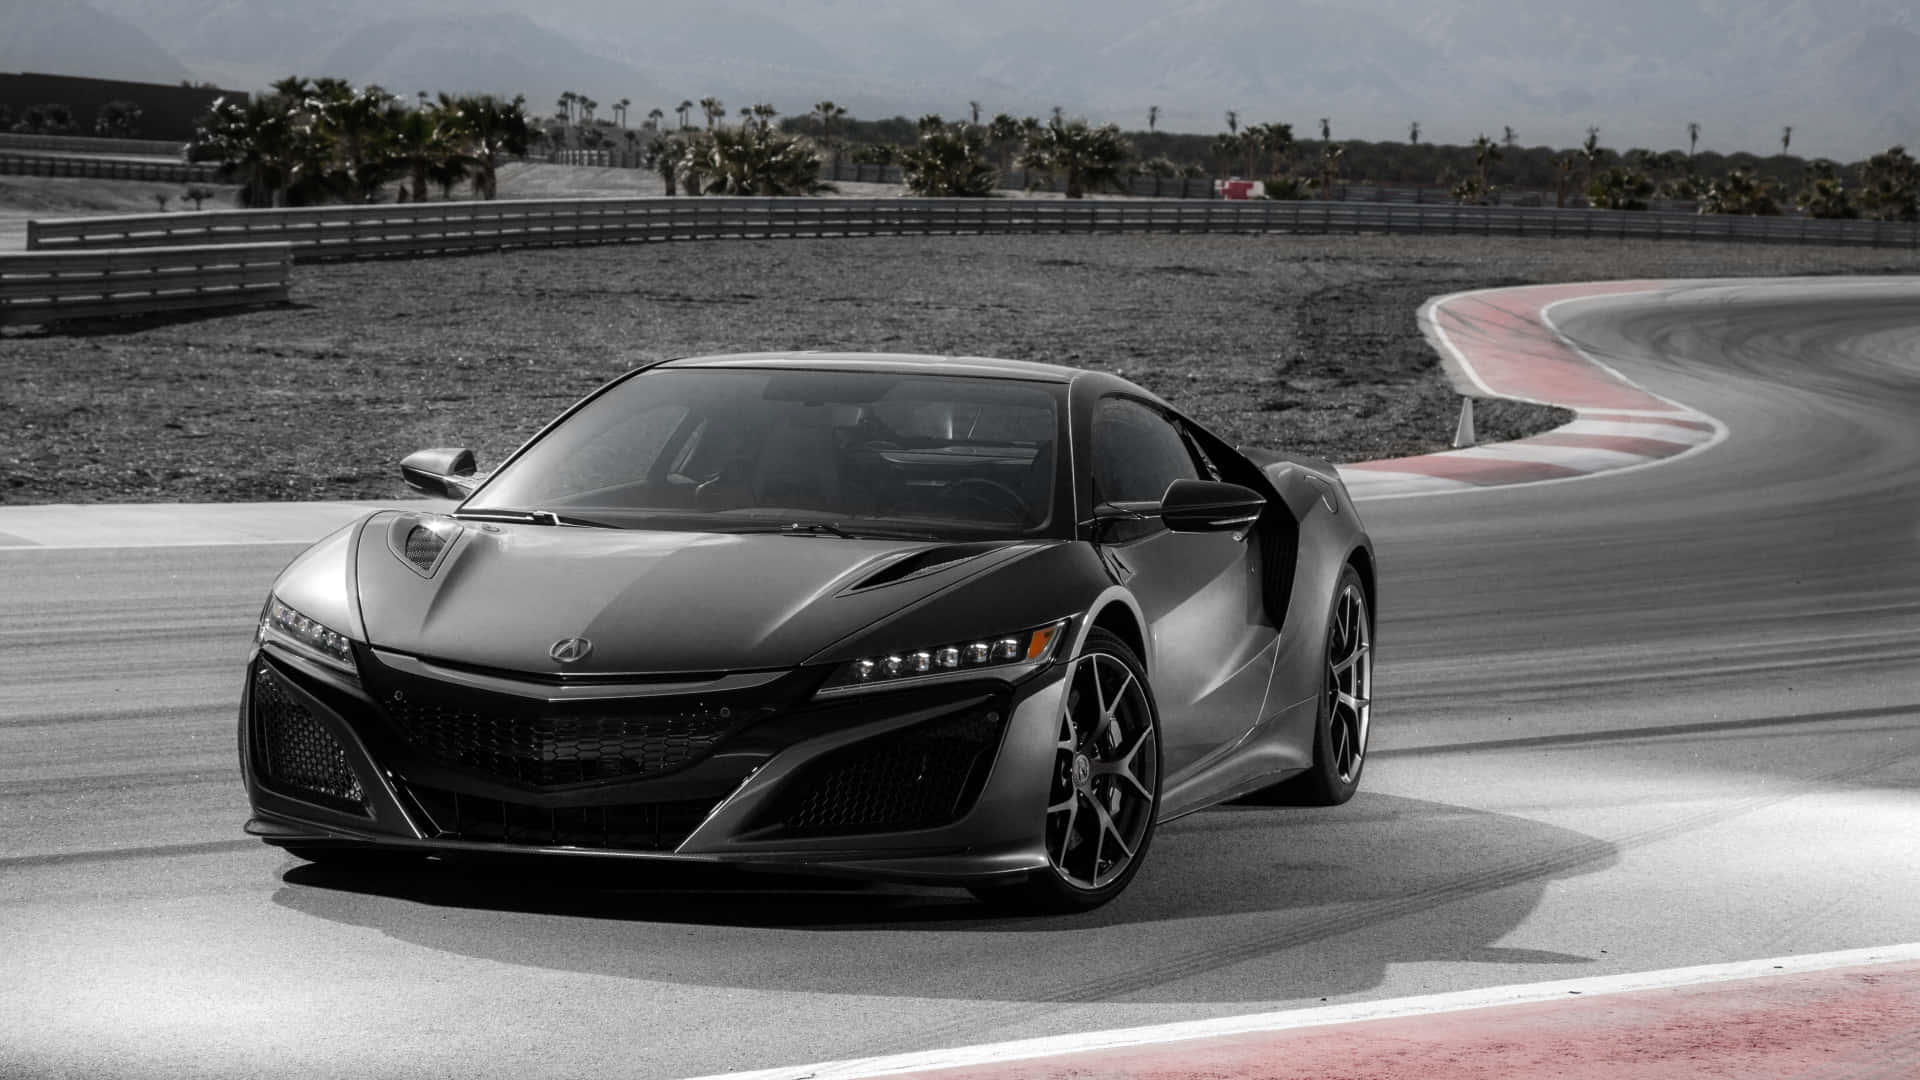 Stunning Acura NSX in motion on the open road Wallpaper